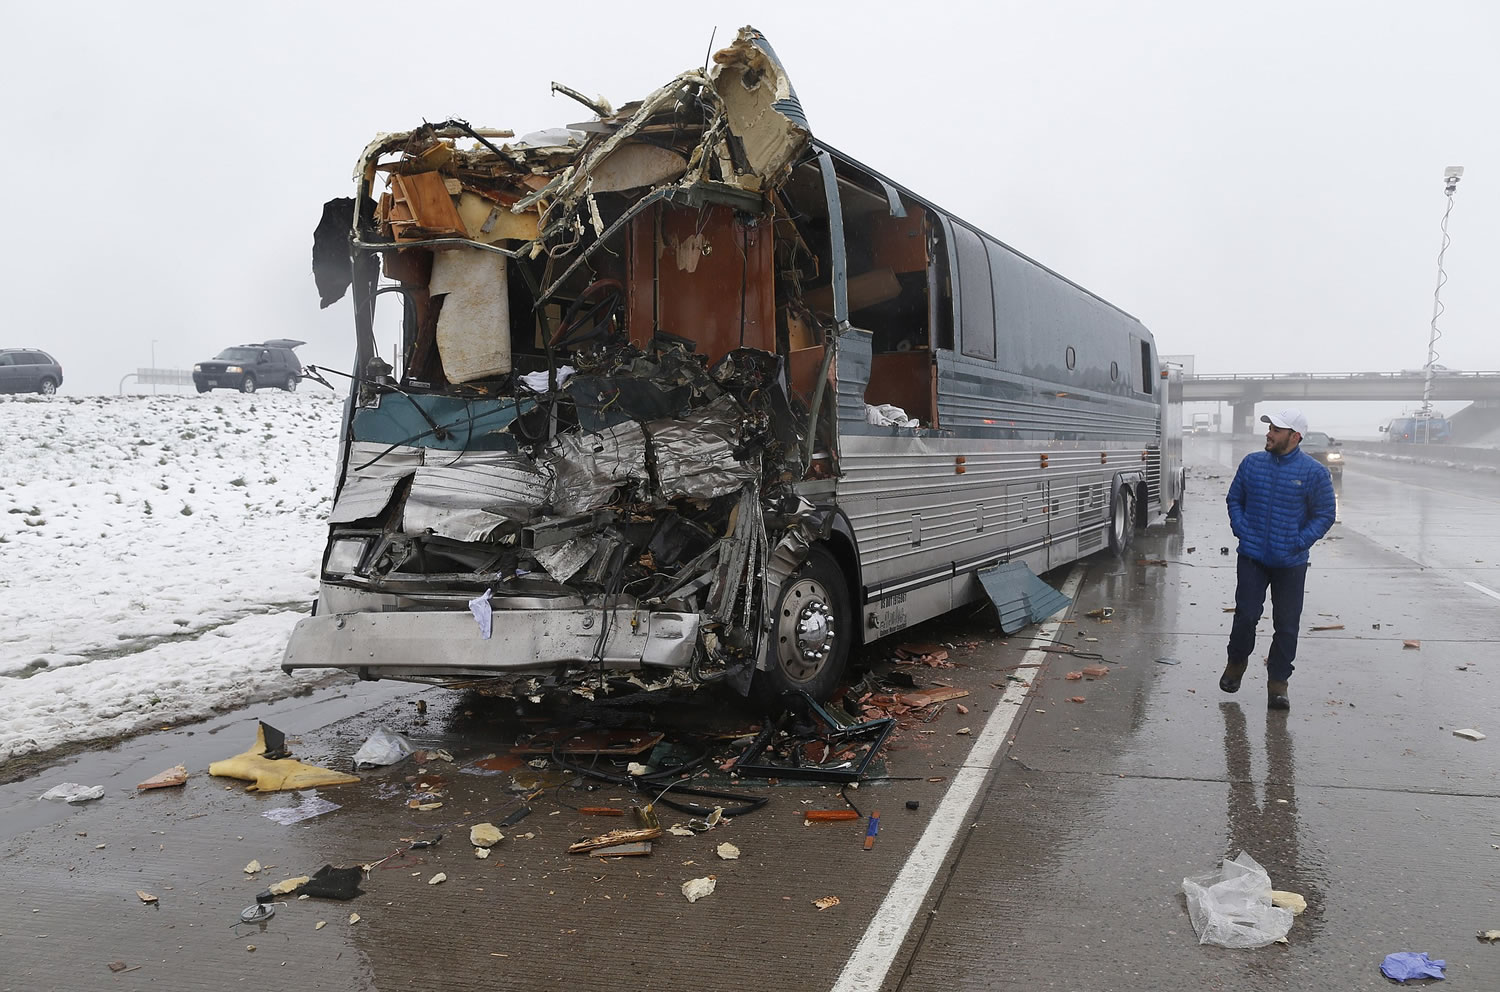 A television reporter looks over a tour bus involved in an accident with a tractor-trailer Friday in Aurora, Colo. Officials say 12 people were injured, two of them critically, in the four-vehicle wreck that shut down Interstate 70 for several hours during a spring storm packing heavy rains and fog.